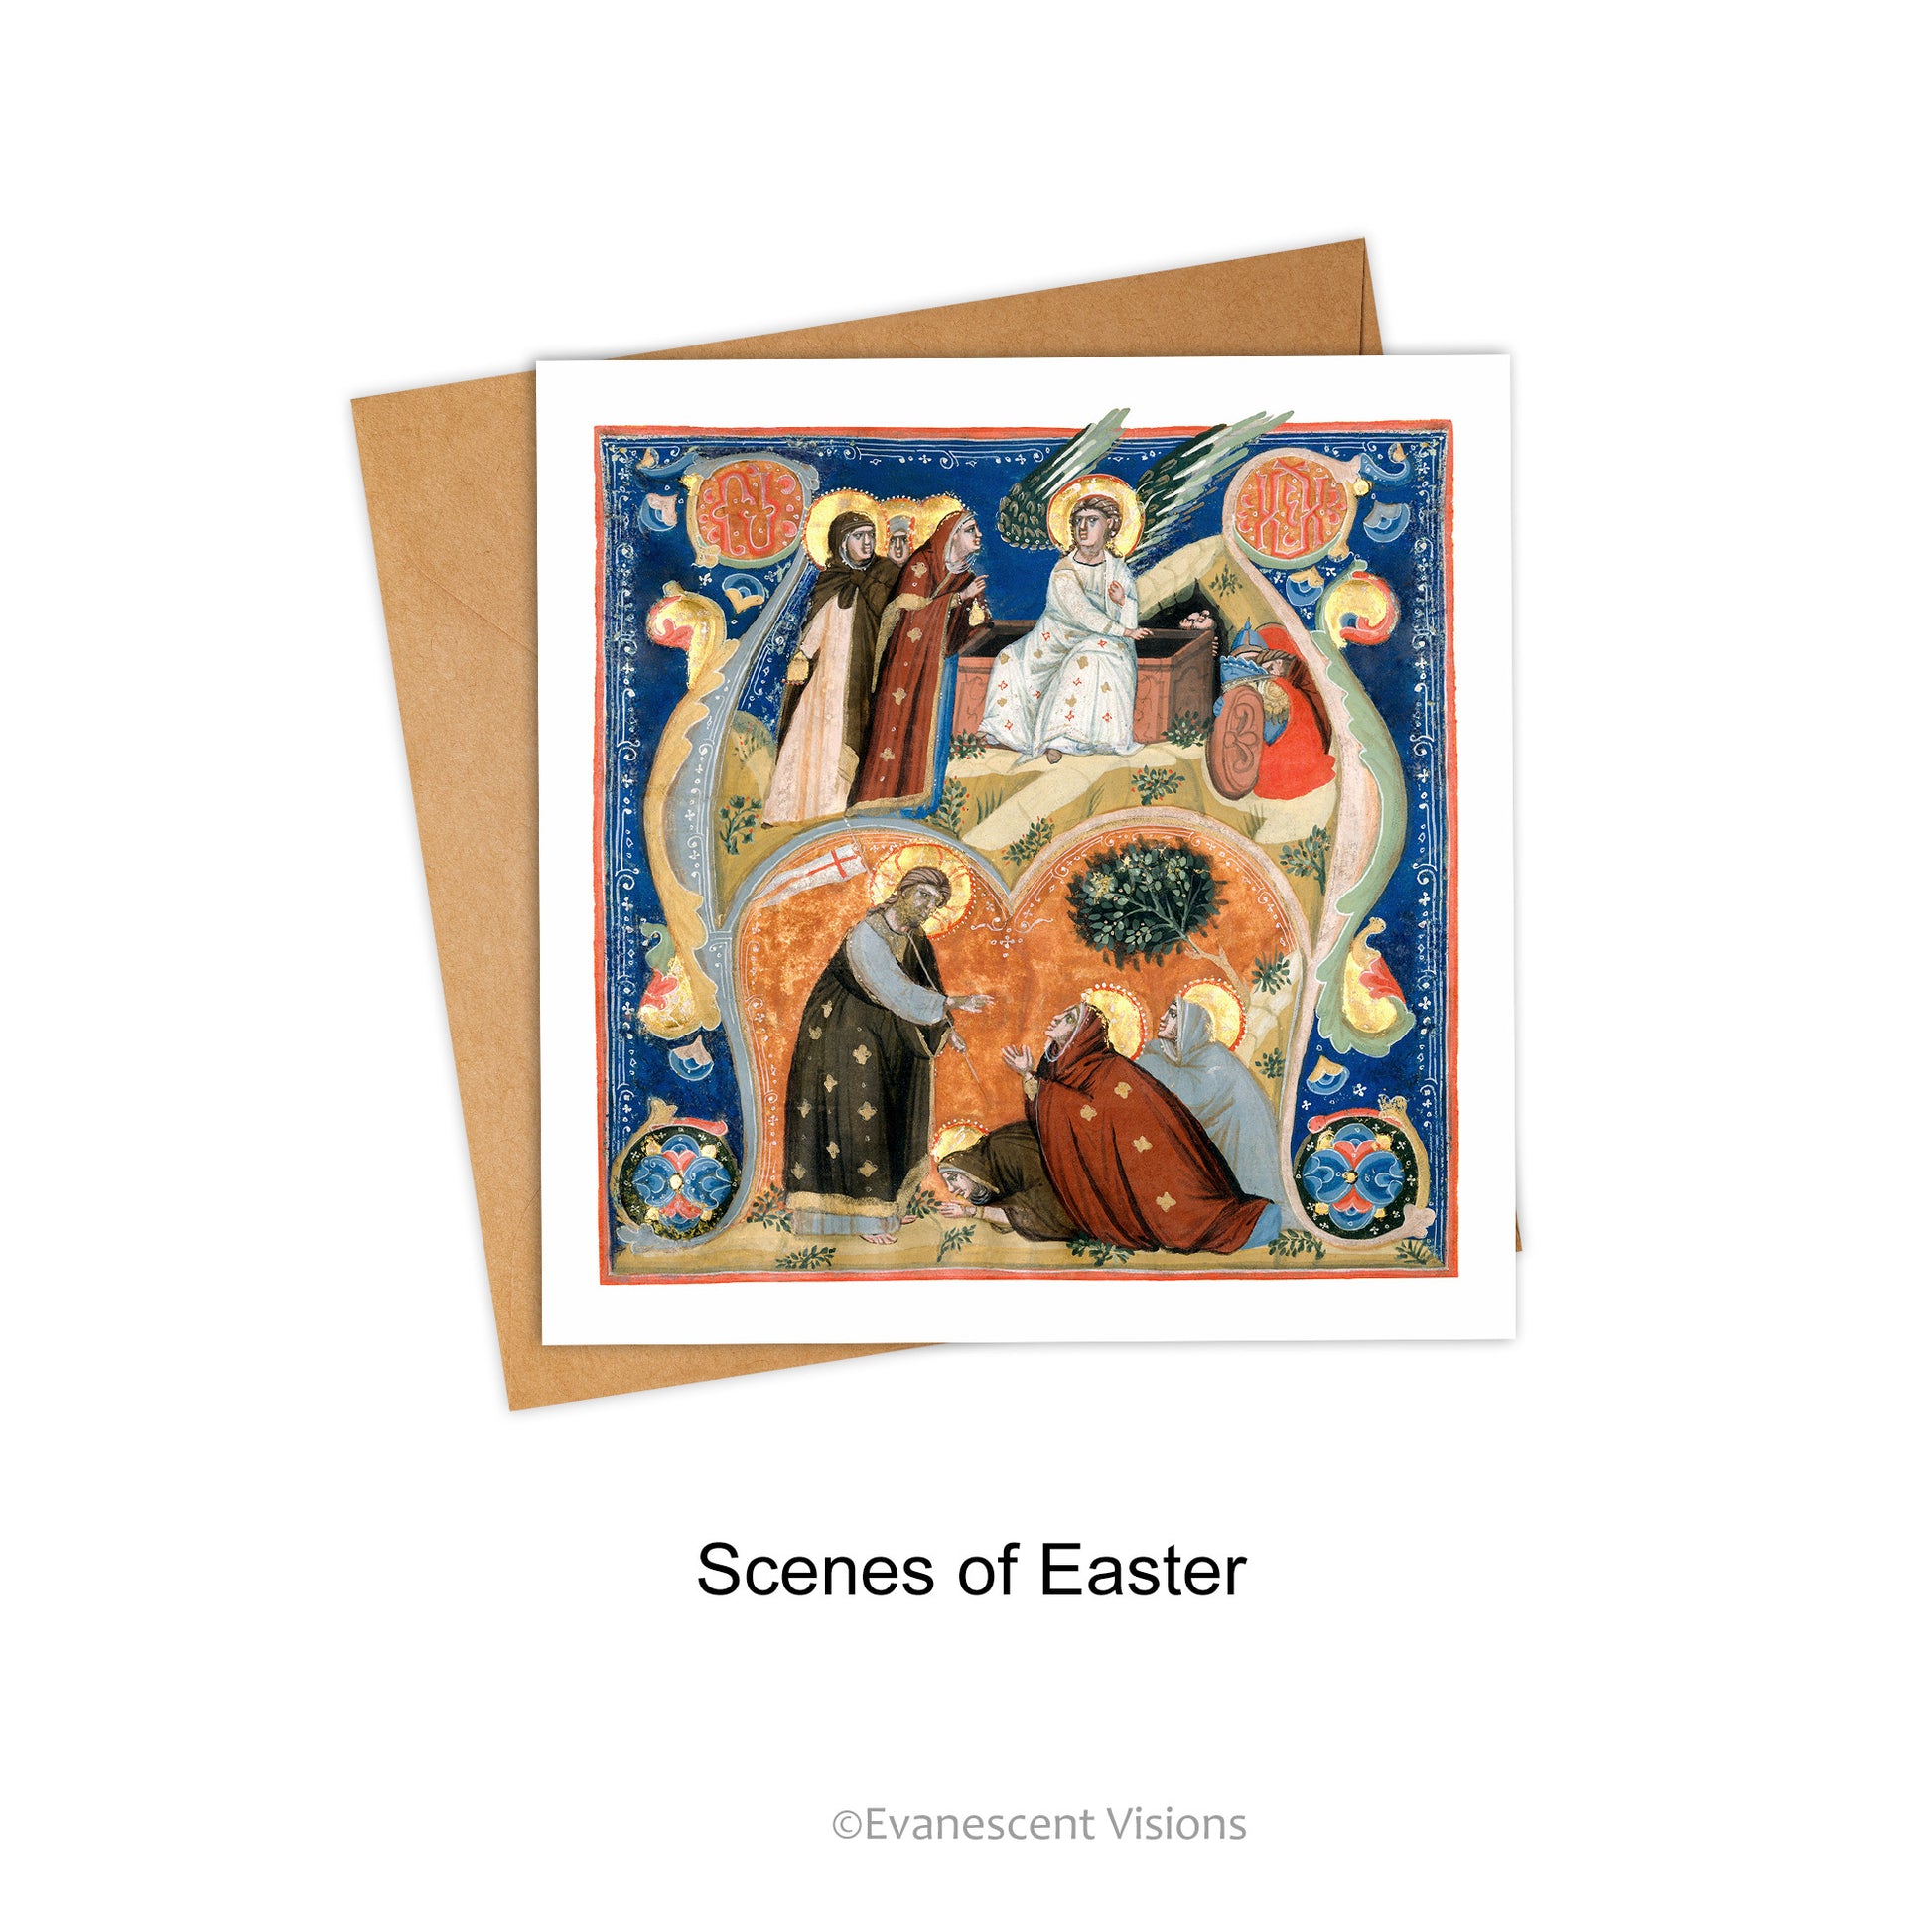 Medieval Illuminations Religious Greeting Card with the Scenes of Easter design